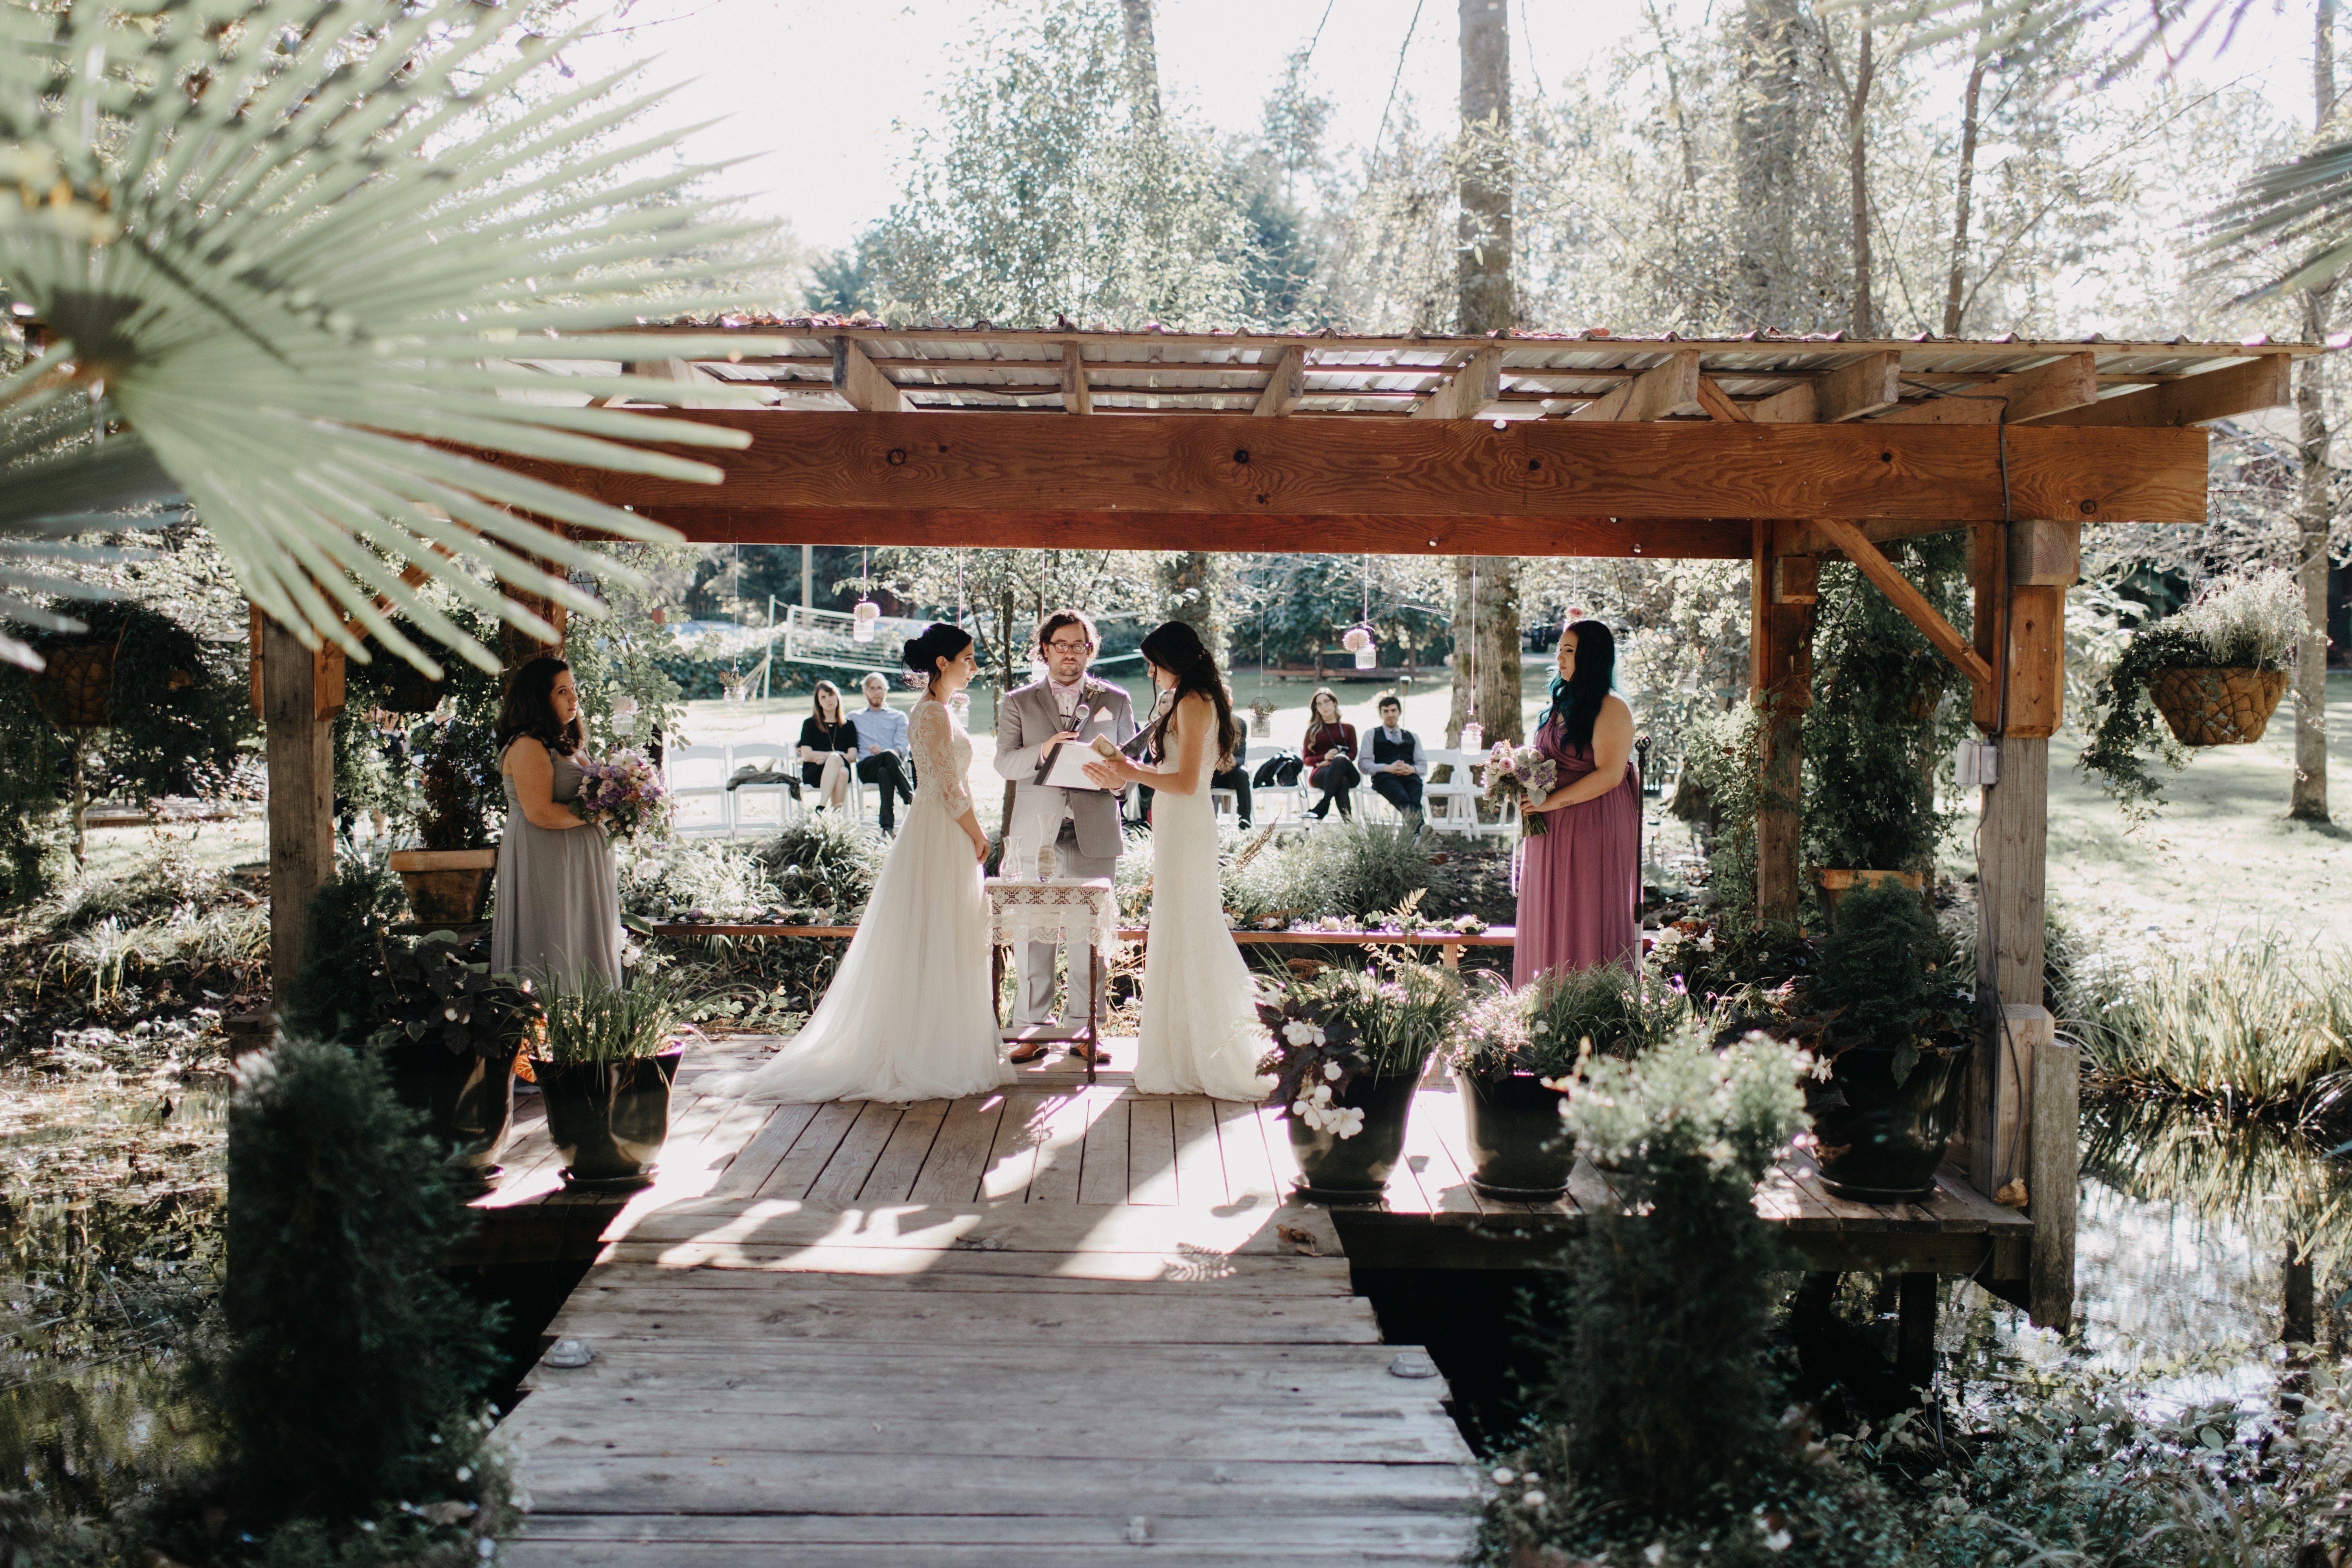 Wedding Ceremony Outline: How to Plan the Order of Events | Brides